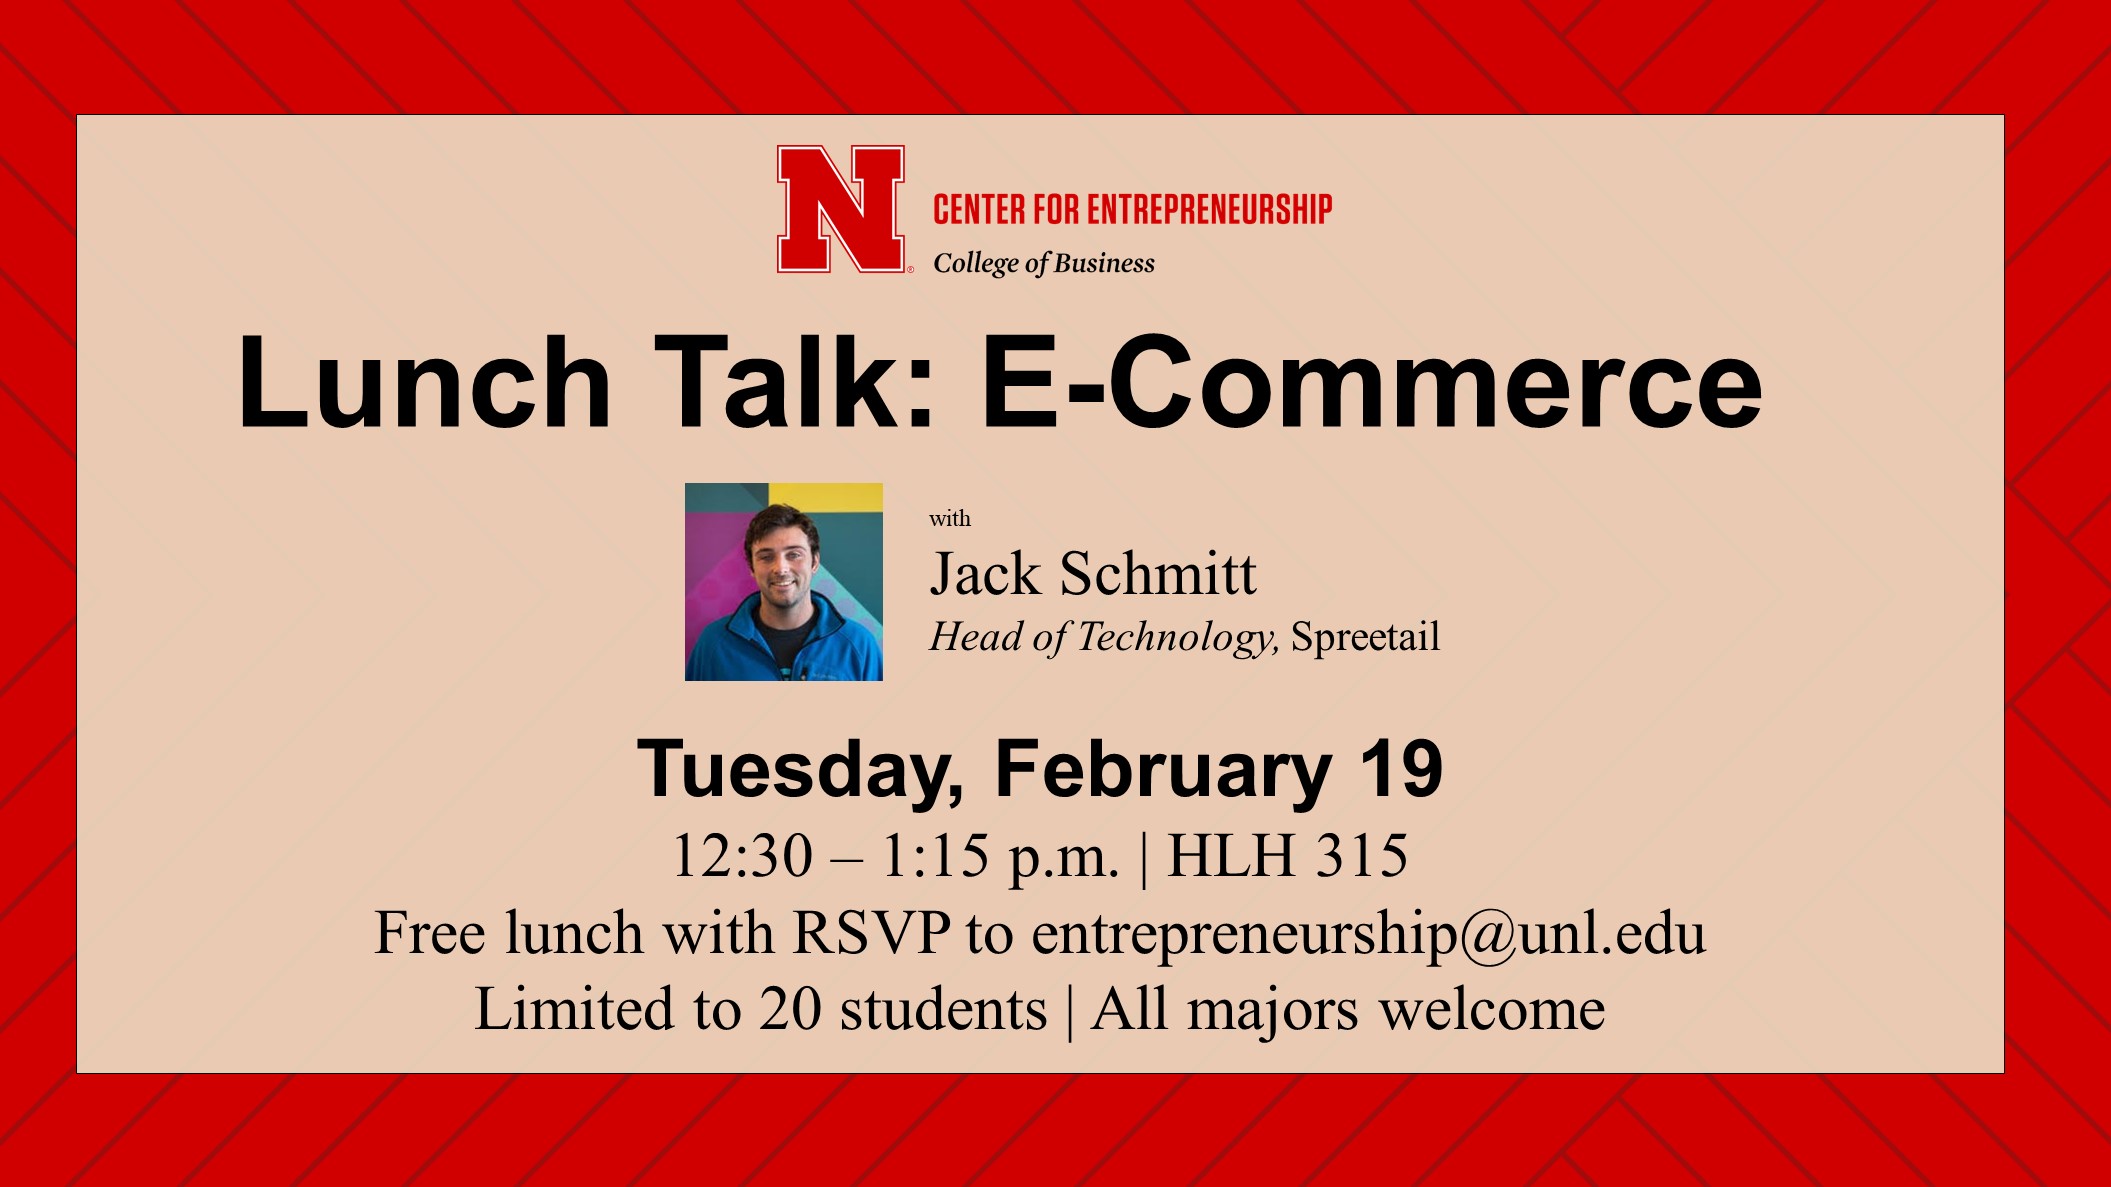 Enjoy a Free Lunch and Talk about E-Commerce, Feb. 19, with Jack Schmitt of Spreetail